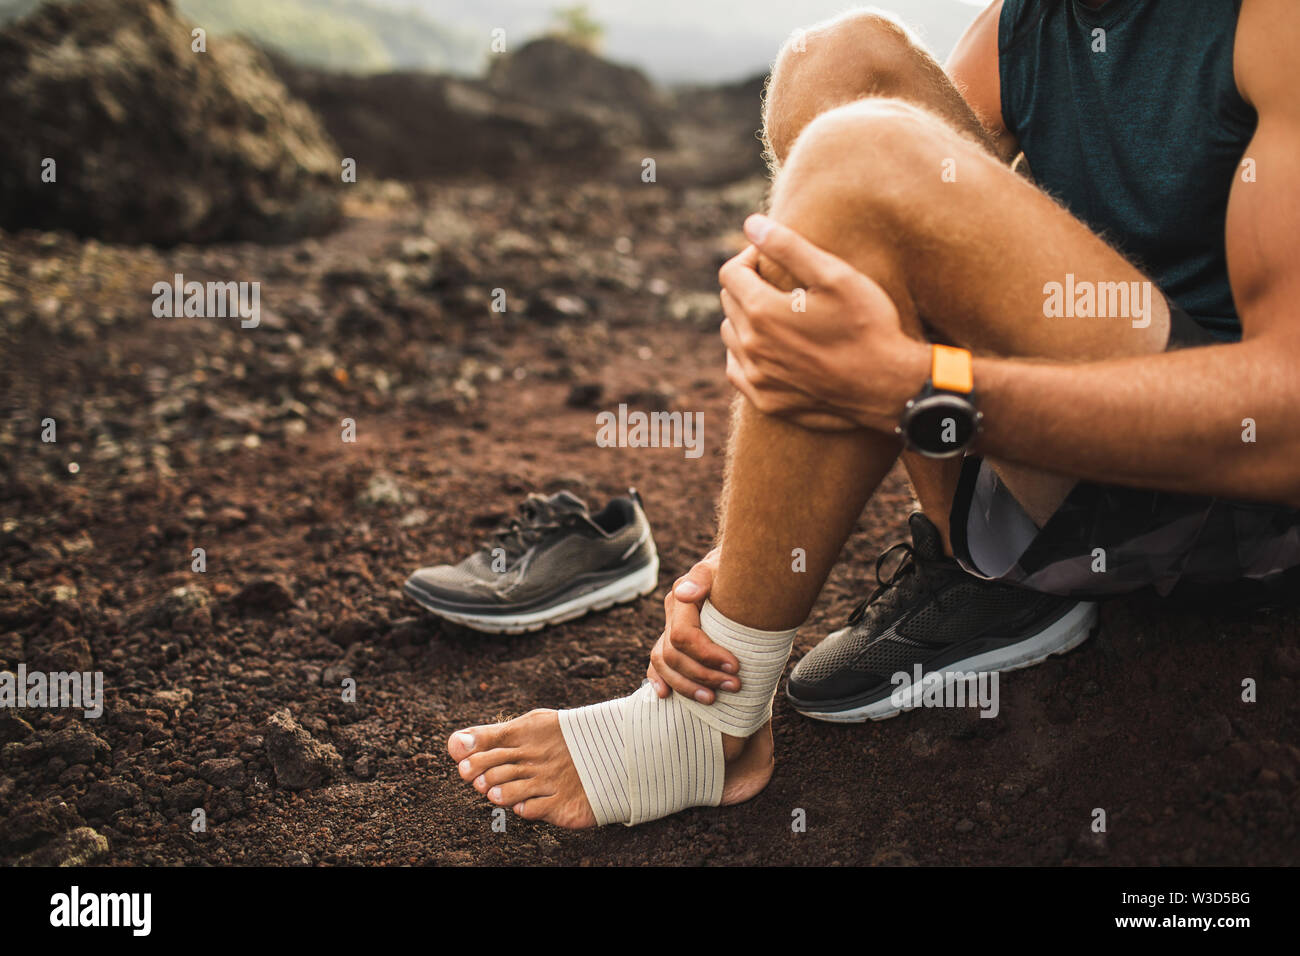 Man bandaging injured ankle. Injury leg while running outdoors. First aid for sprained ligament or tendon. Close-up on dark background. Stock Photo